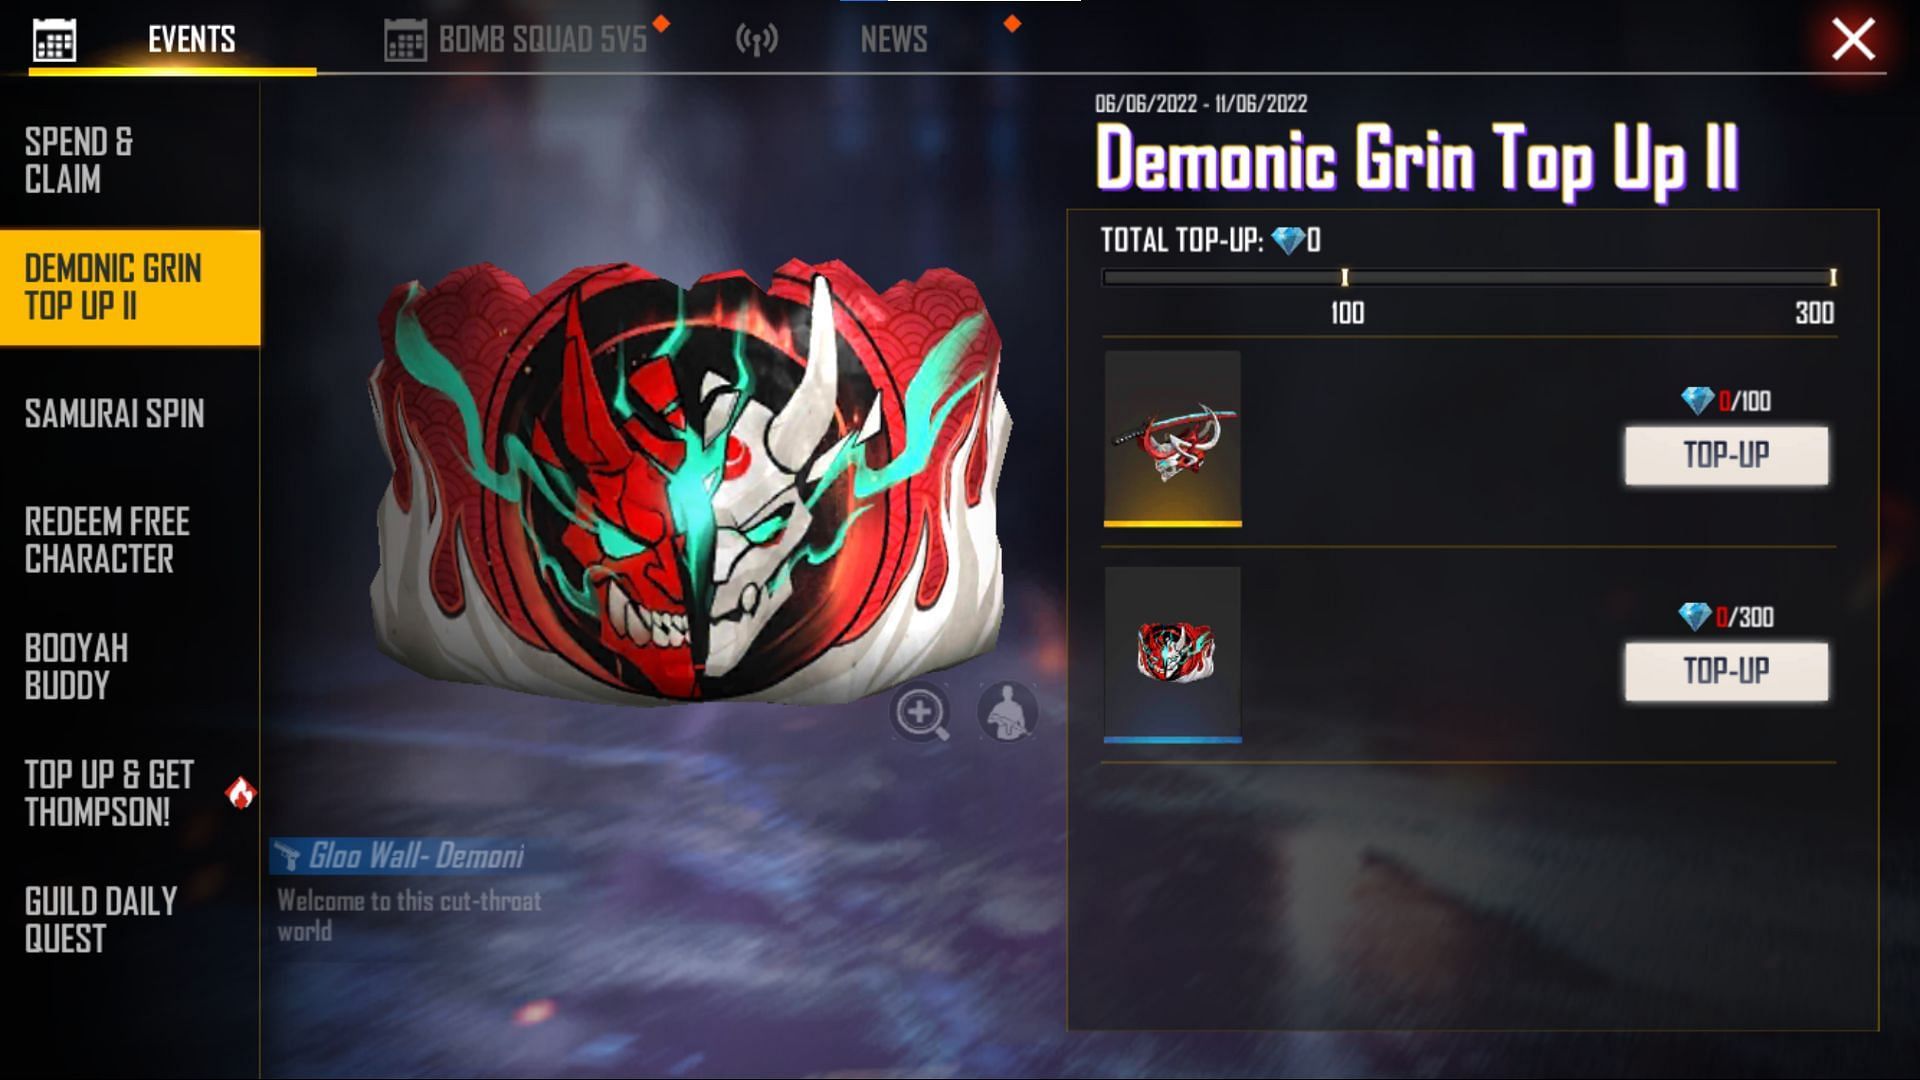 Demonic Grin Top Up II started recently, and it offers two rewards to players (Image via Garena)